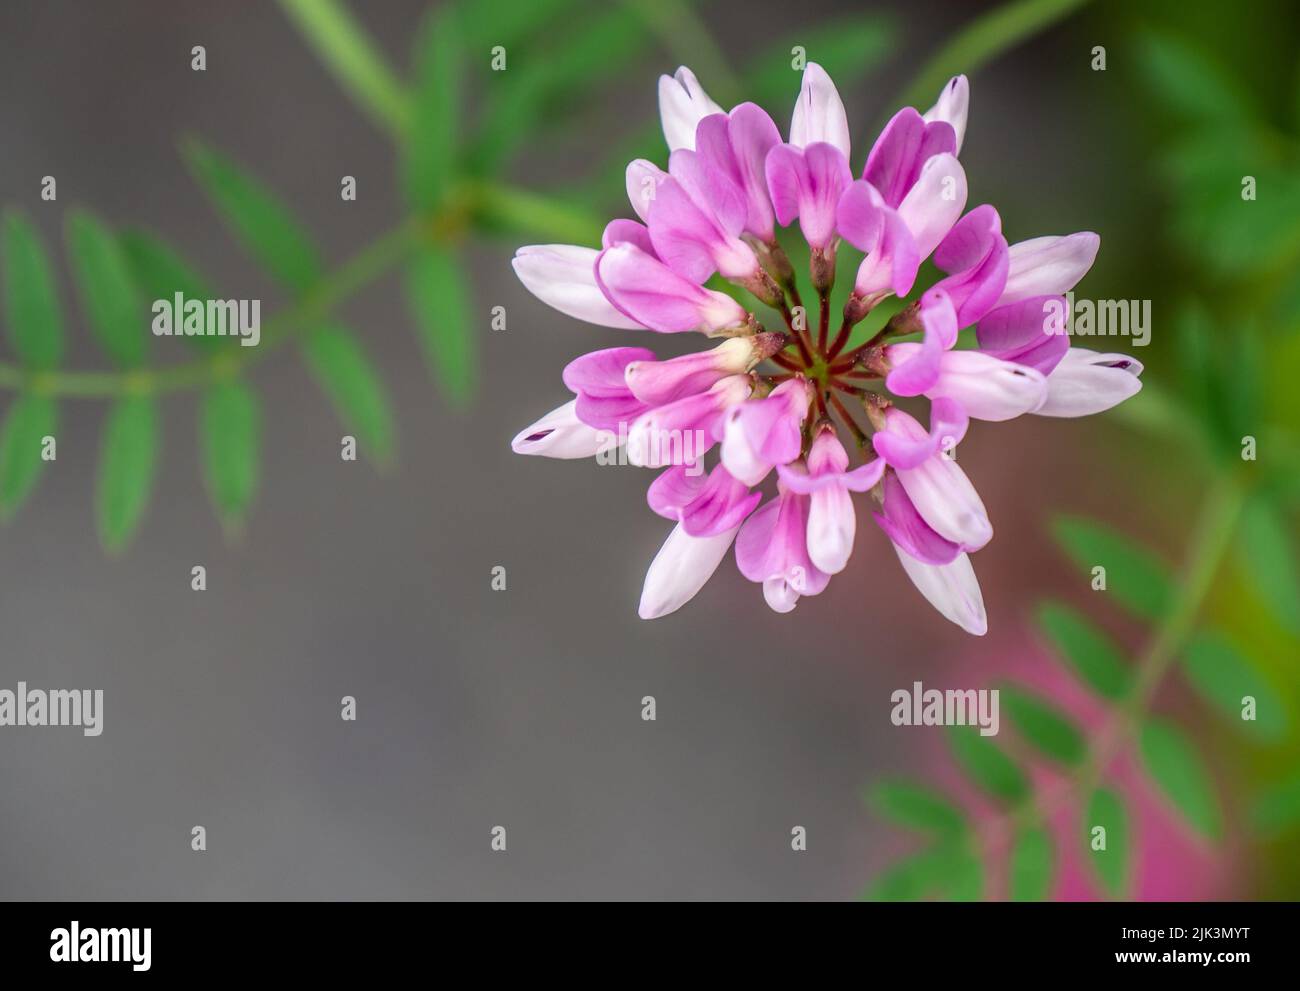 Close-up of the pink flower on a common crownvetch plant that is growing in a flower garden on a bright summer day in June with a blurred background. Stock Photo